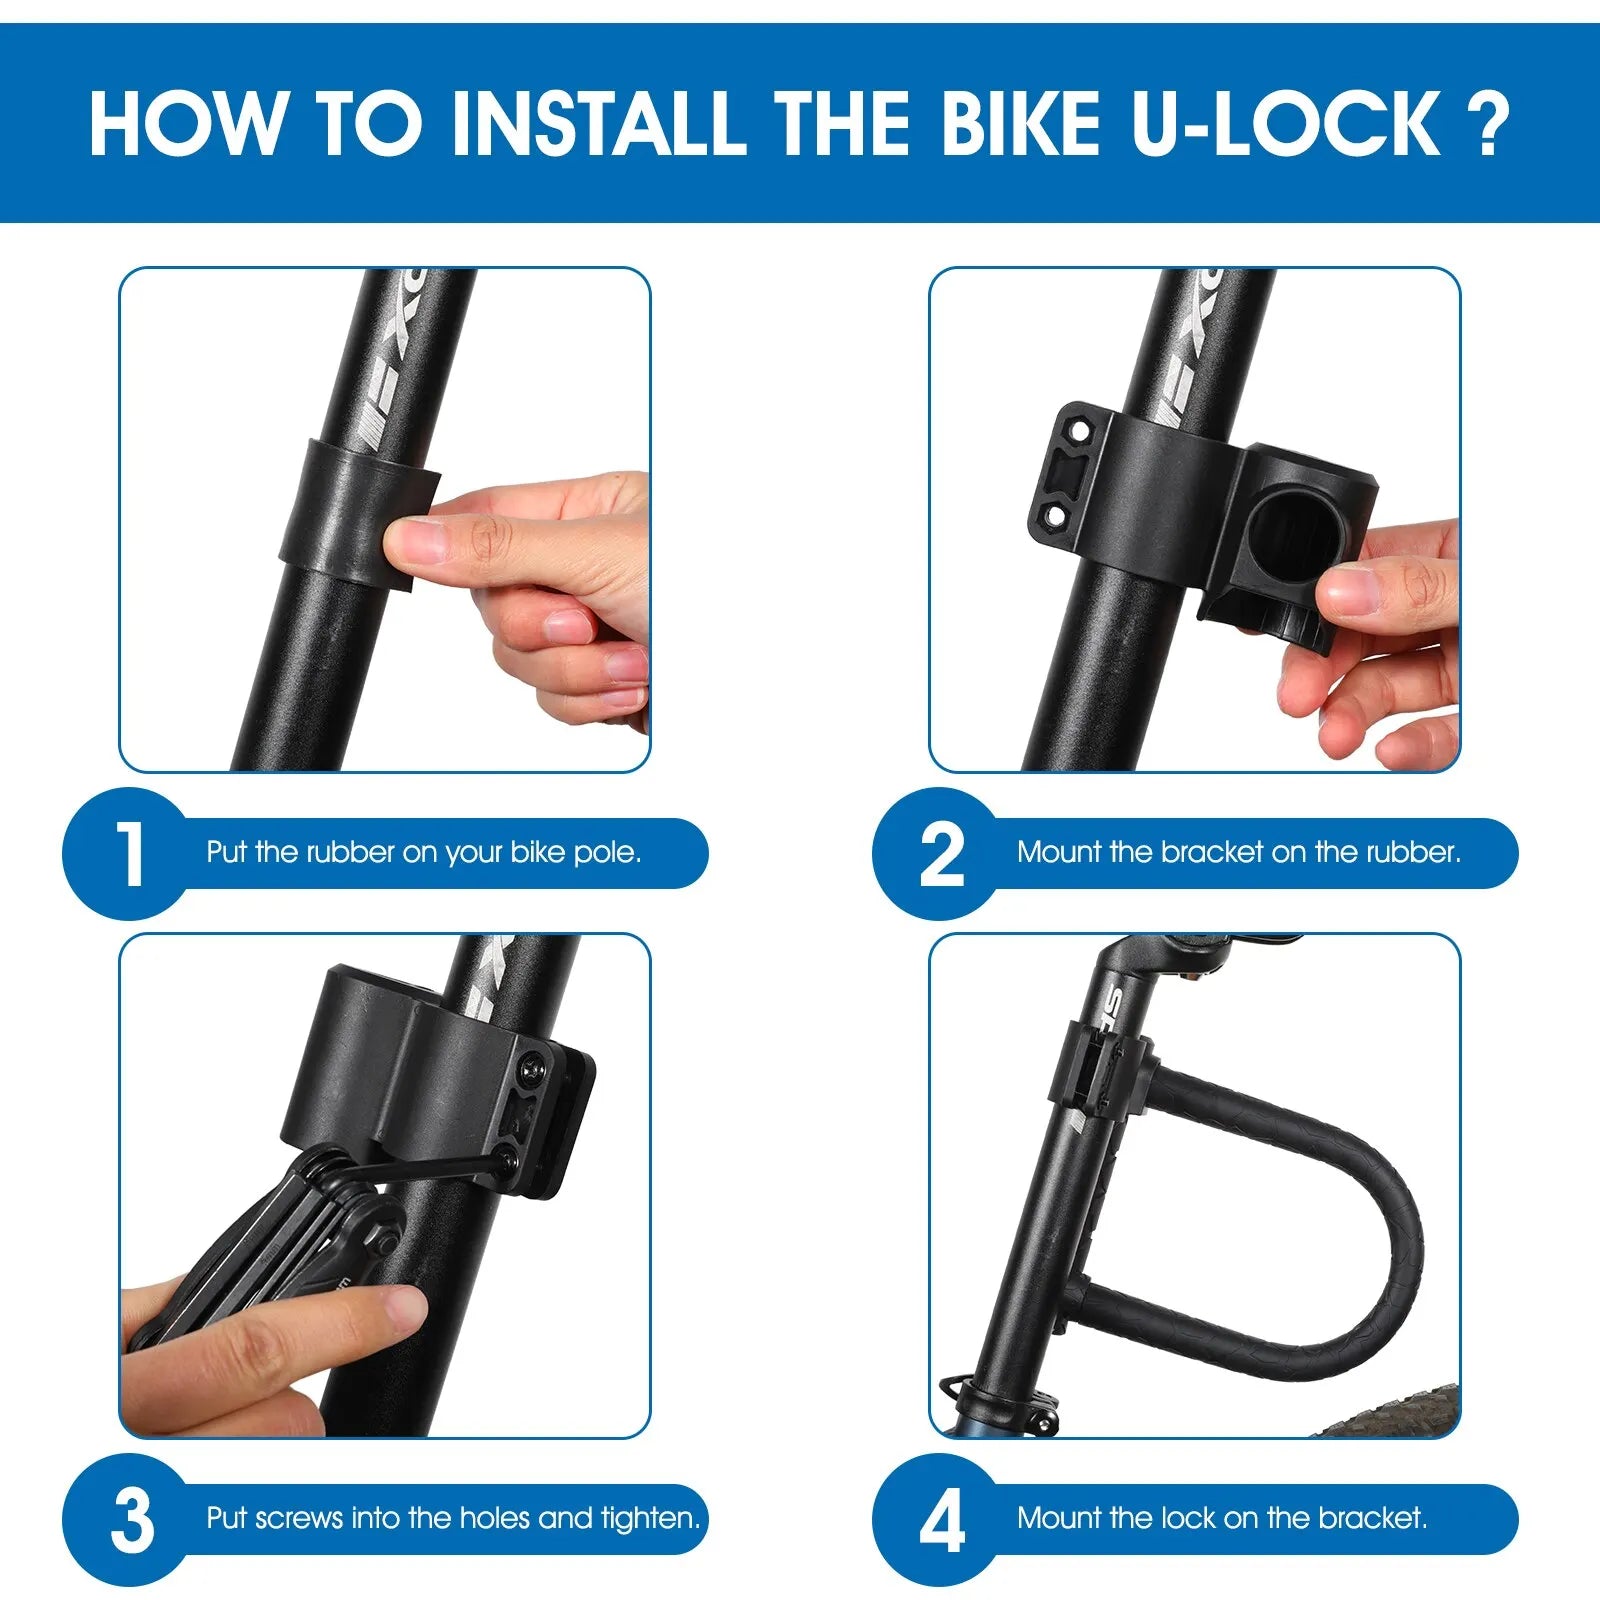 A black Bicycle U Lock 2 Keys Anti-theft Safety MTB Road Bike Padlock Motorcycle Scooter Bicycle Lock Cycling Accessories from West Biking is shown against a white and red background with promotional text displaying discount offers valid from March 21 to March 27.